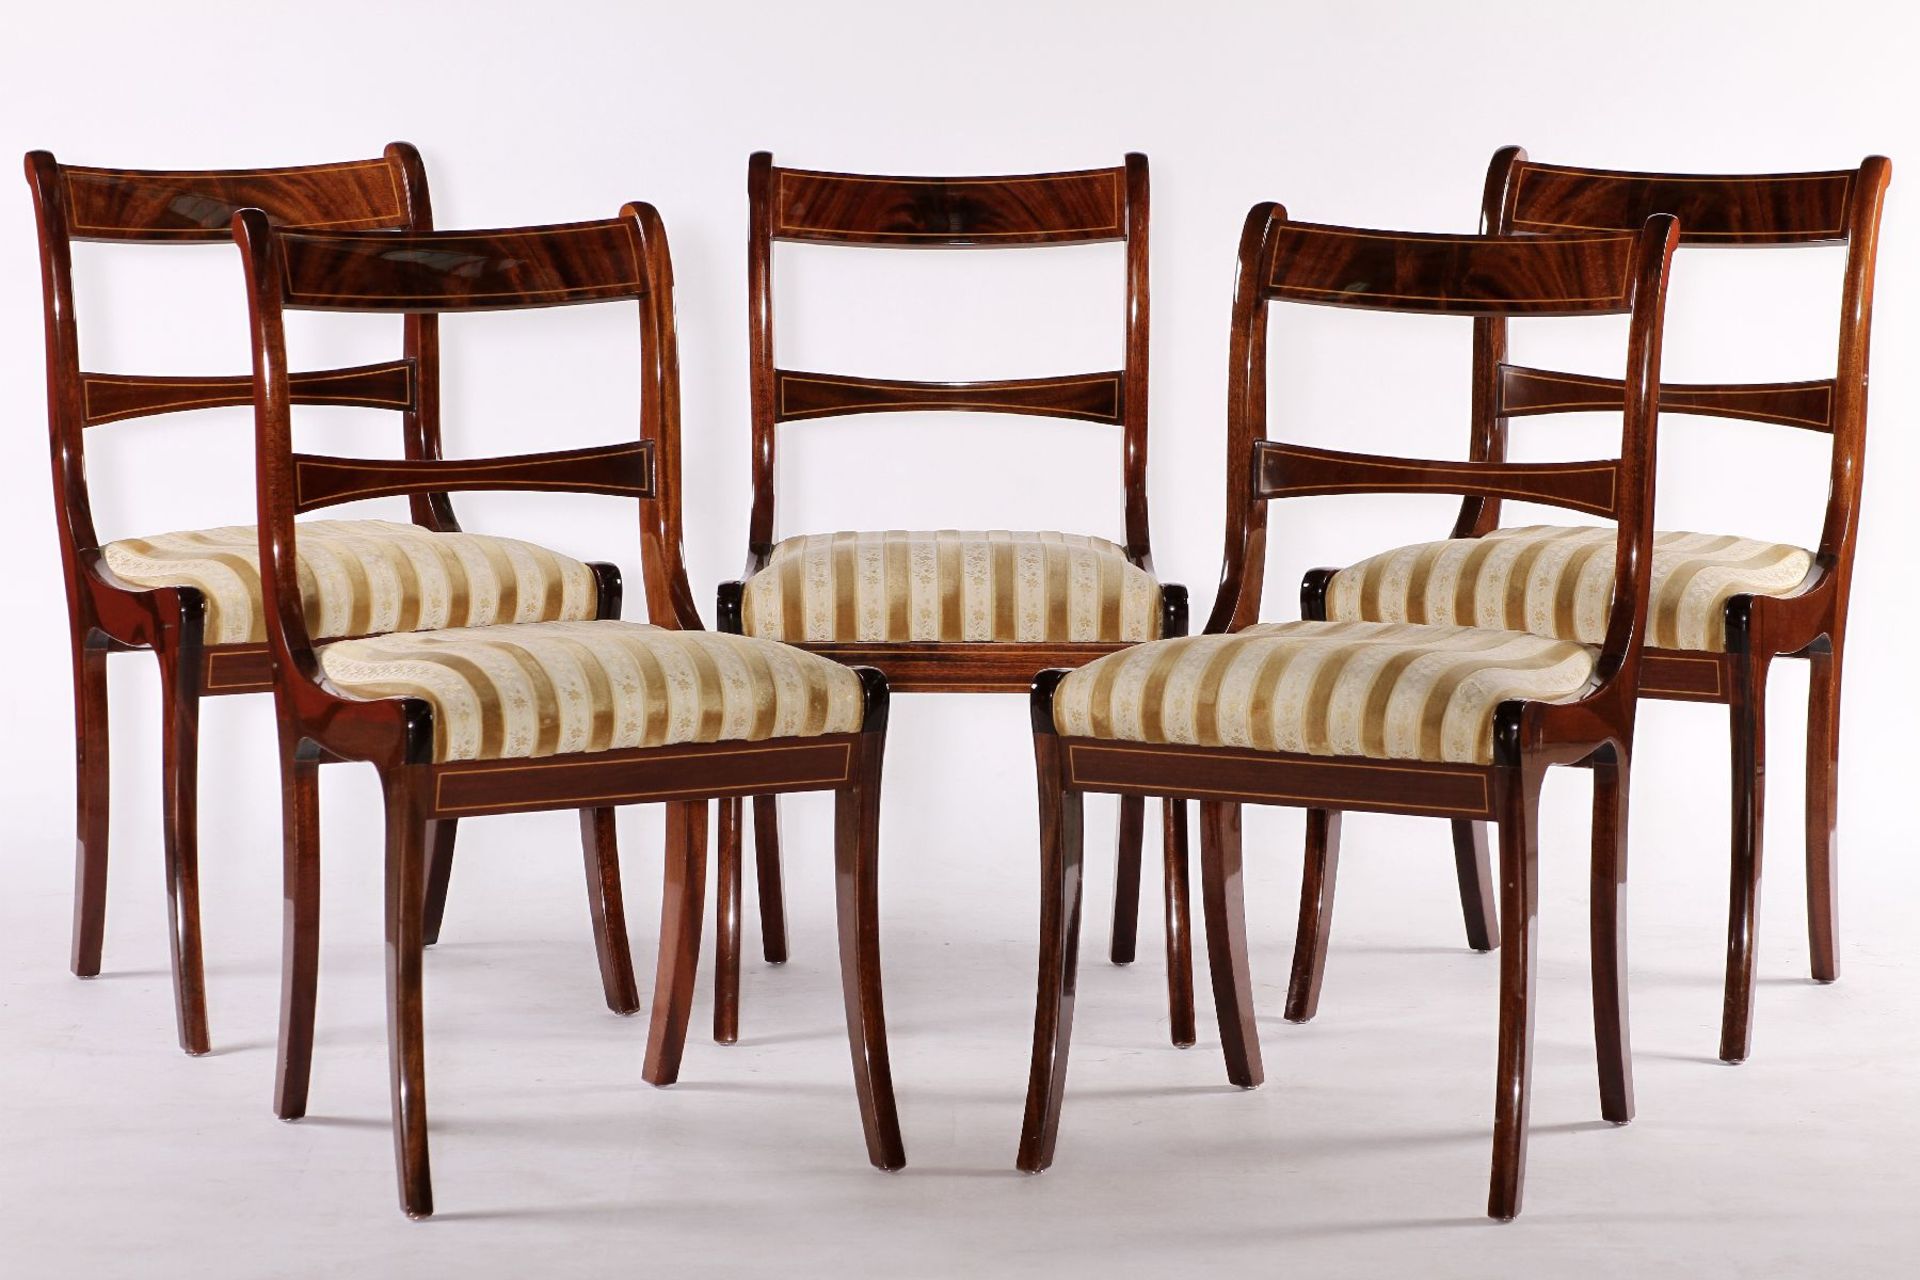 5 chairs, partly solid Mahogany and veneer, elegantly curved, ocher and cream-colored striped fabric